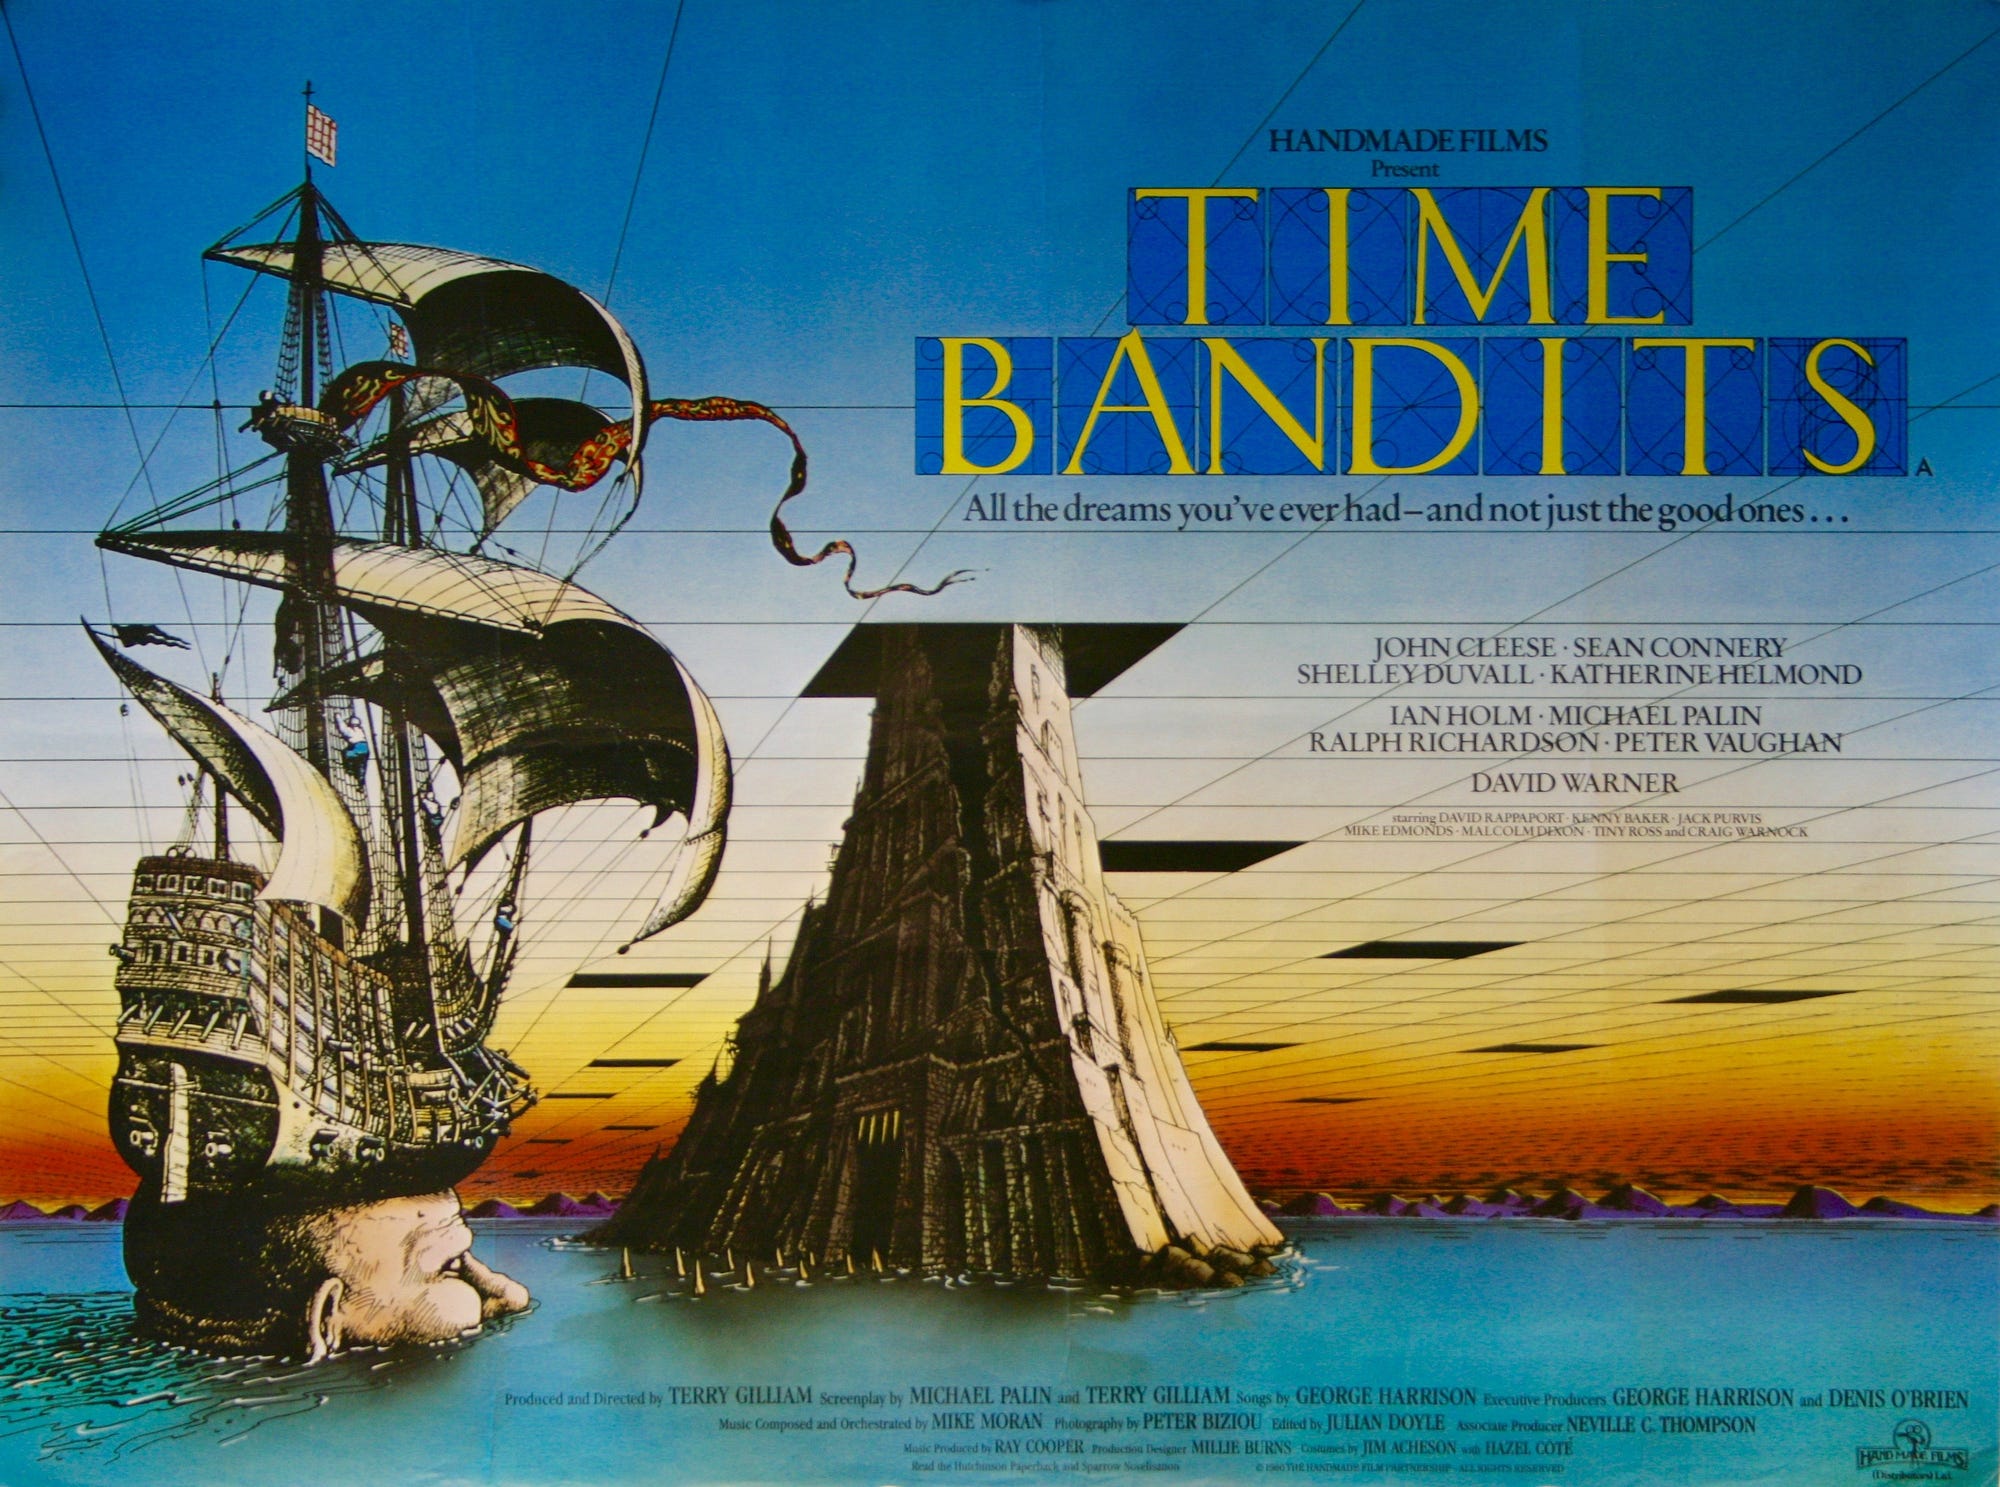 My Favourite Terry Gilliam Film: Time Bandits